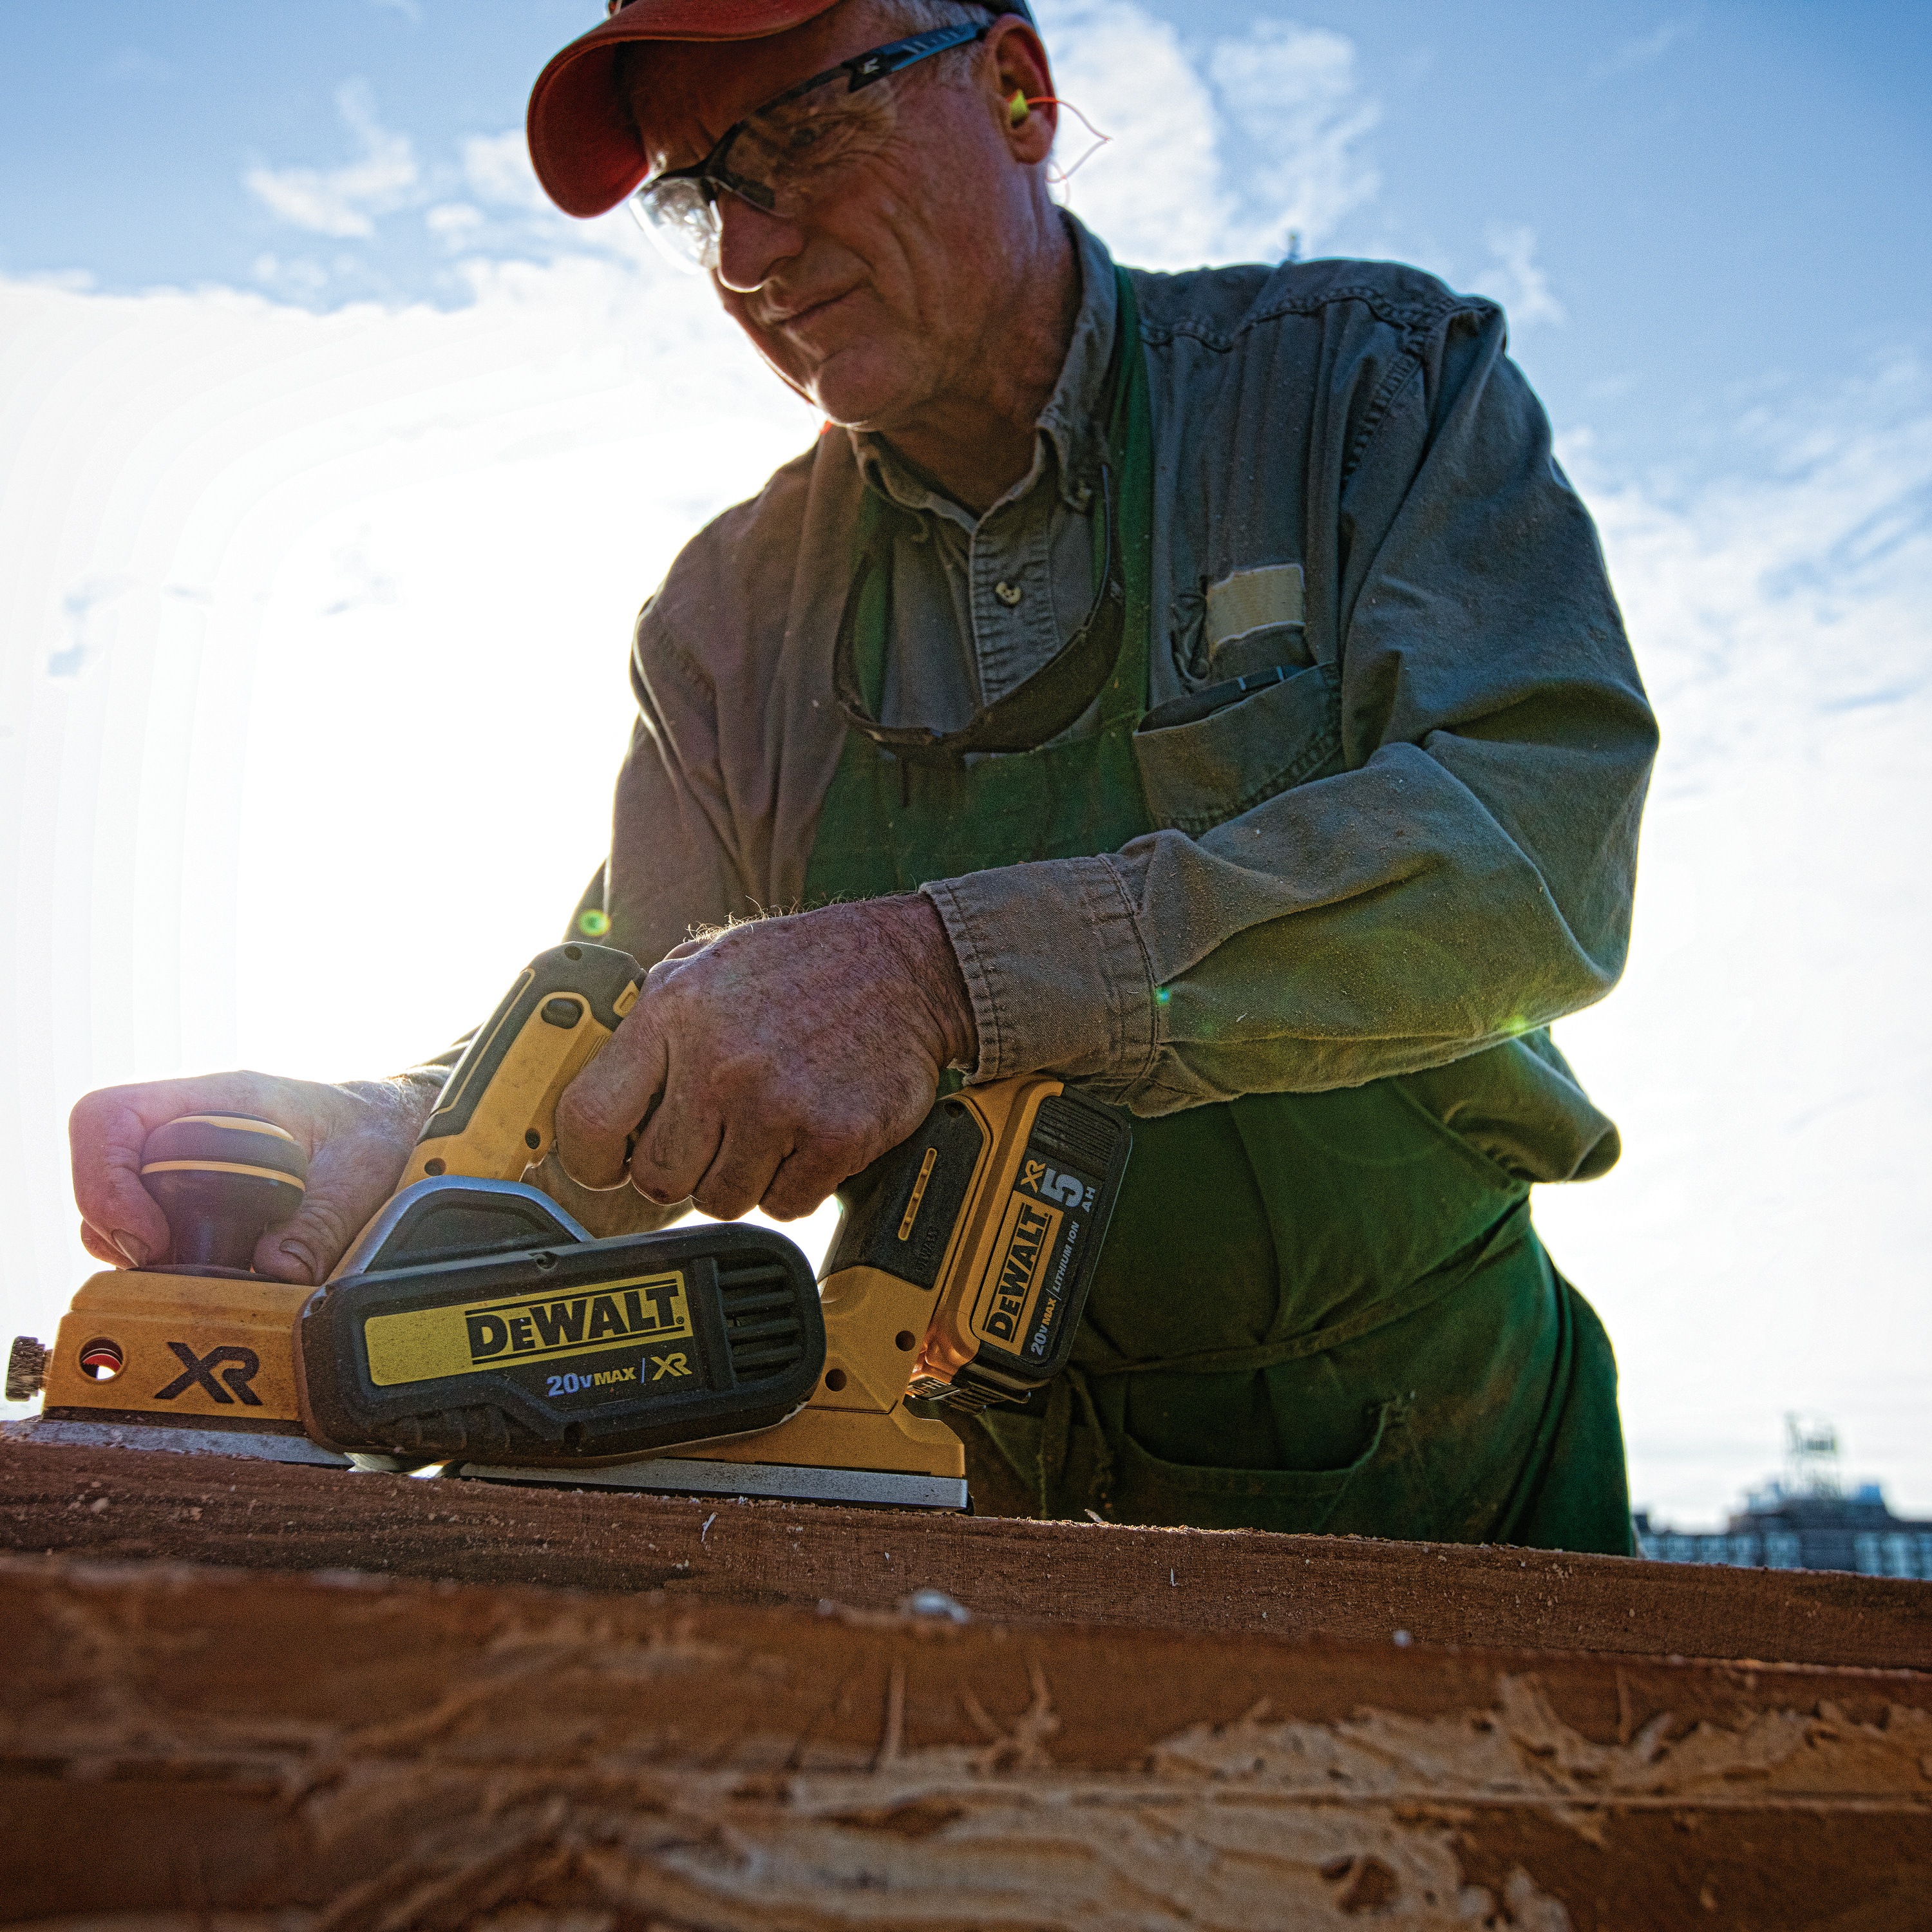 Brushless cordless planer being used by a person to ensure parallelism of cut.